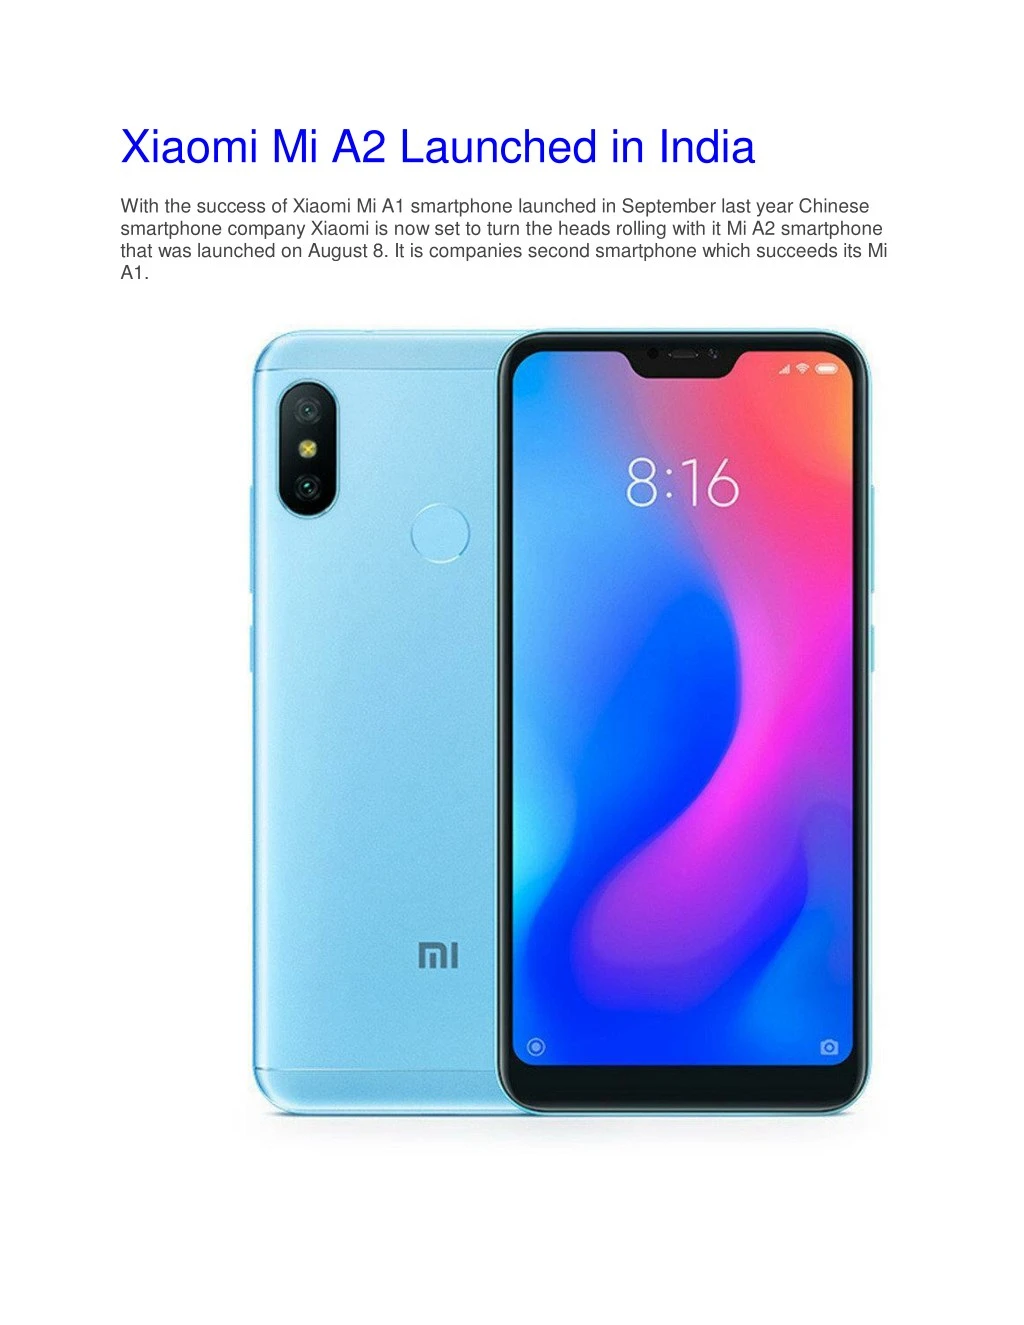 xiaomi mi a2 launched in india with the success